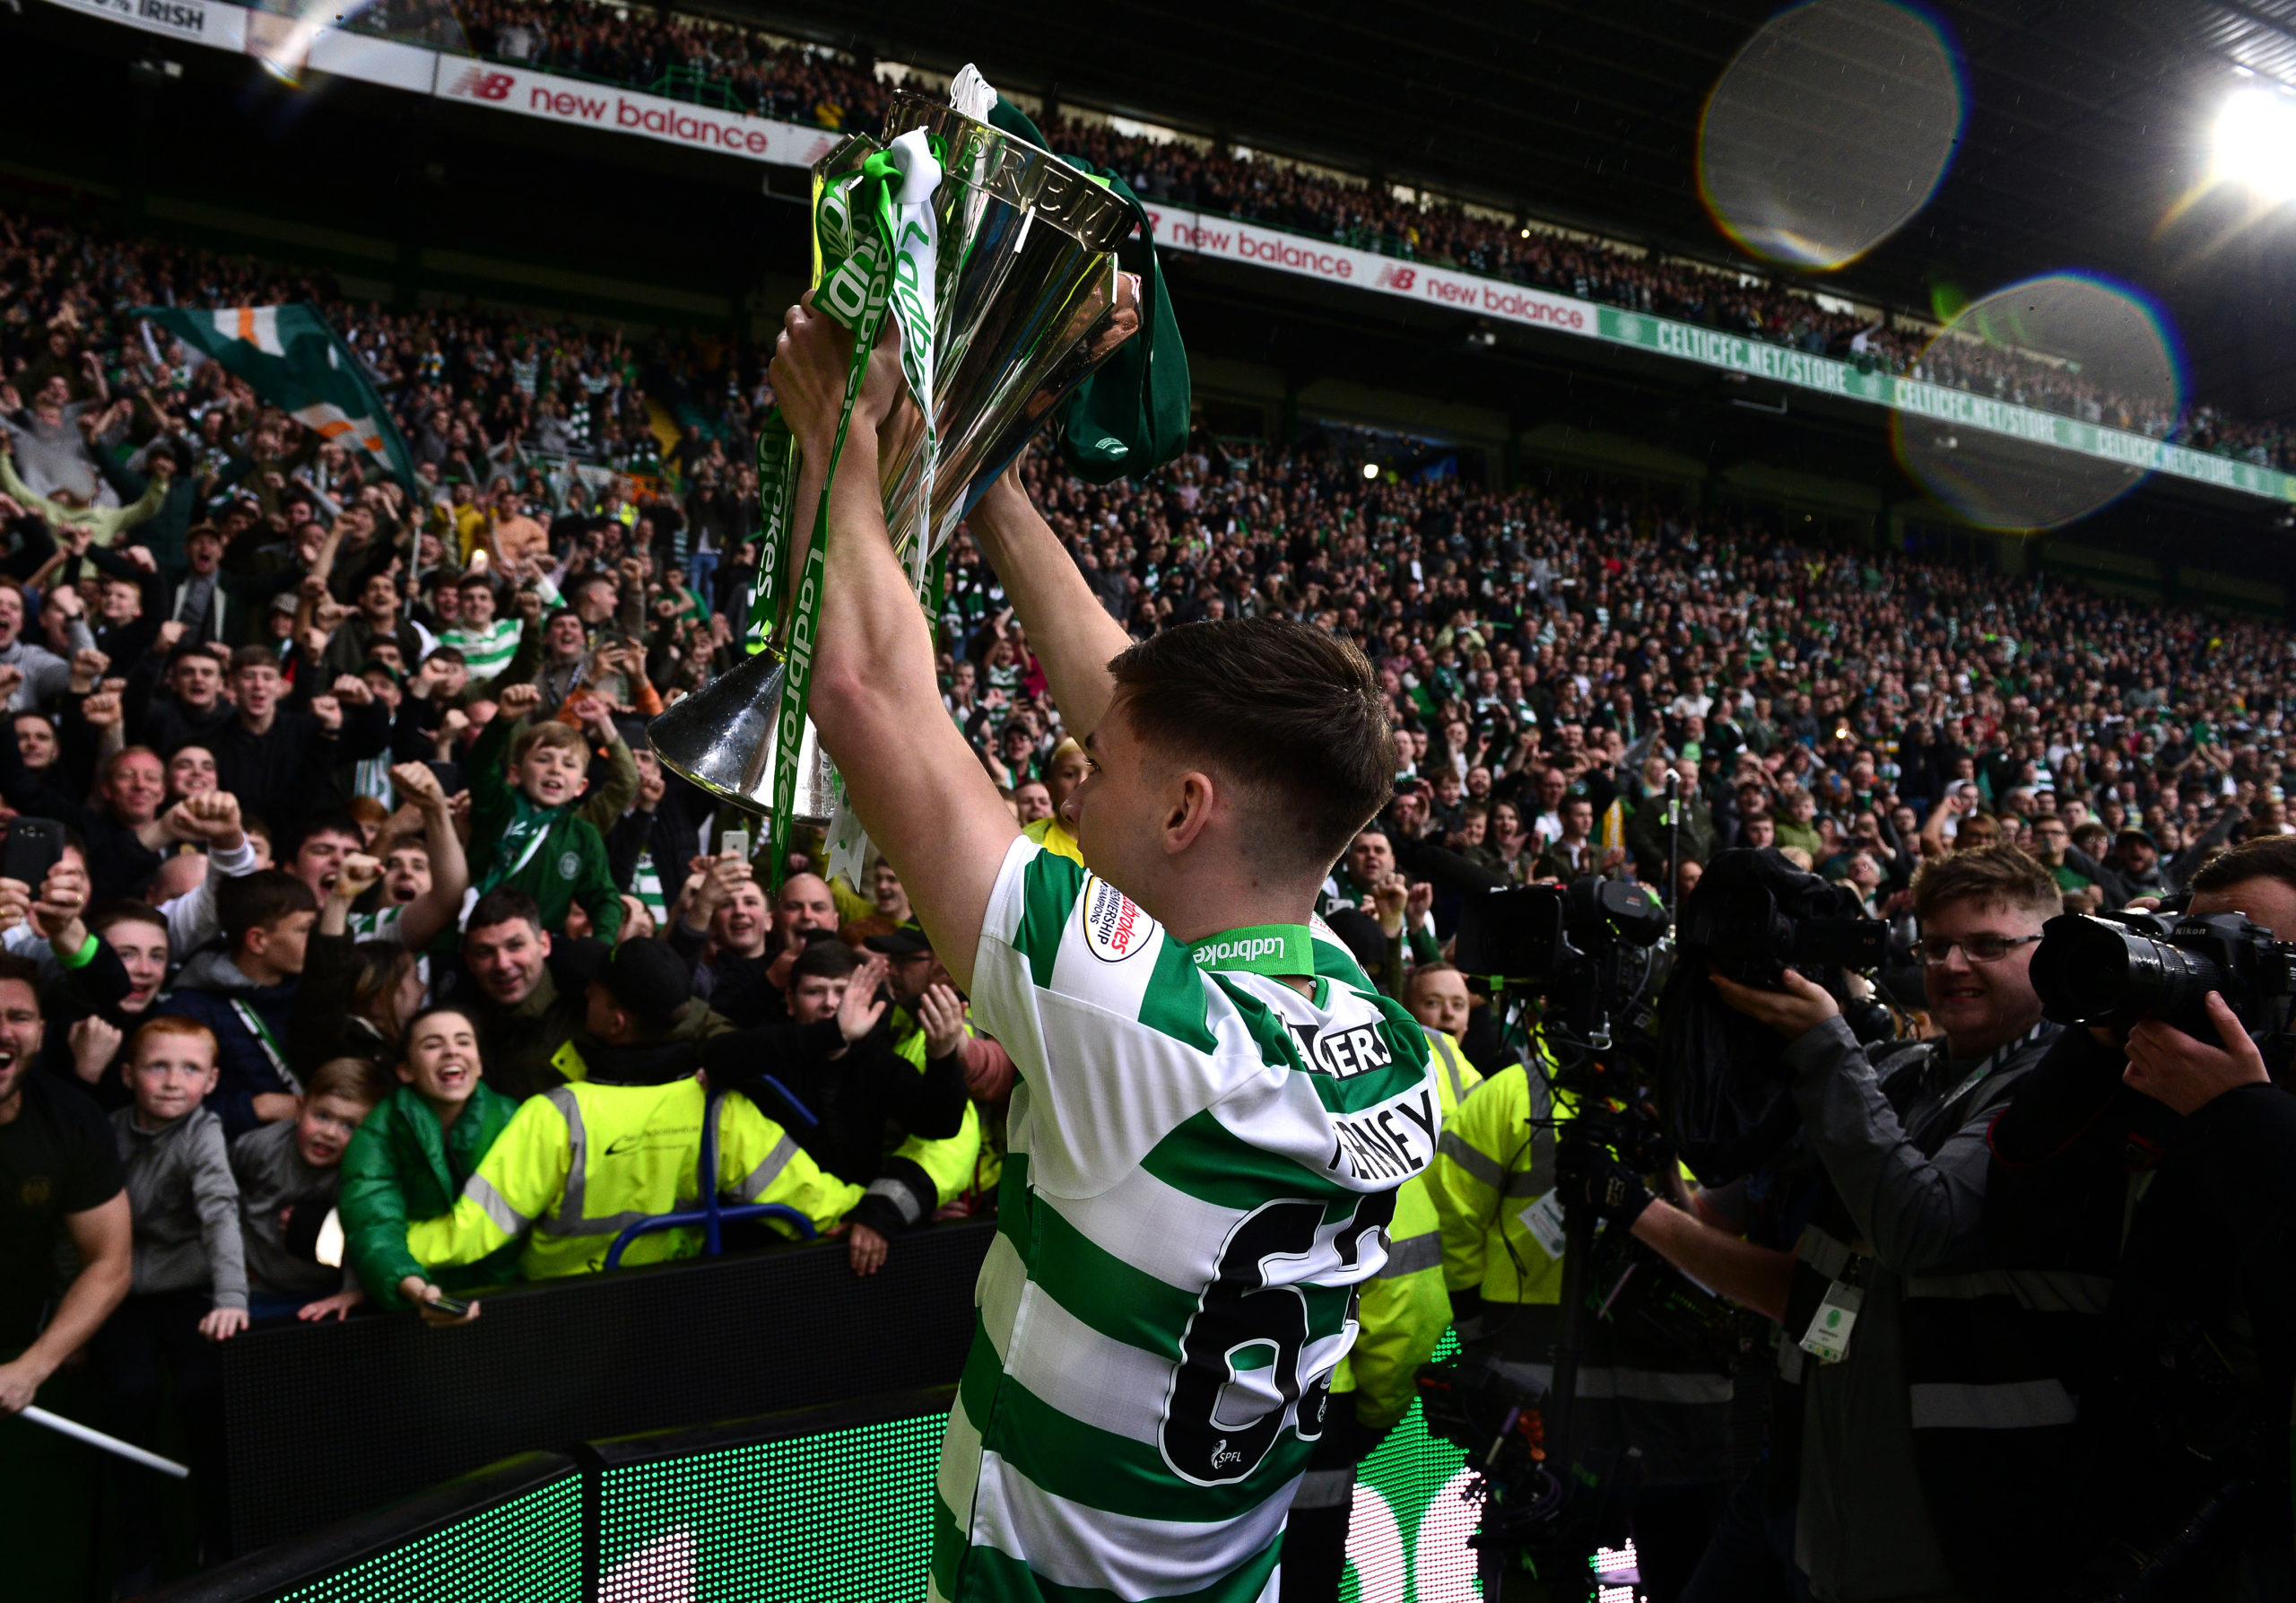 Celtic legend Paul McStay claims his Dad spotted a fan favourite in Kieran Tierney